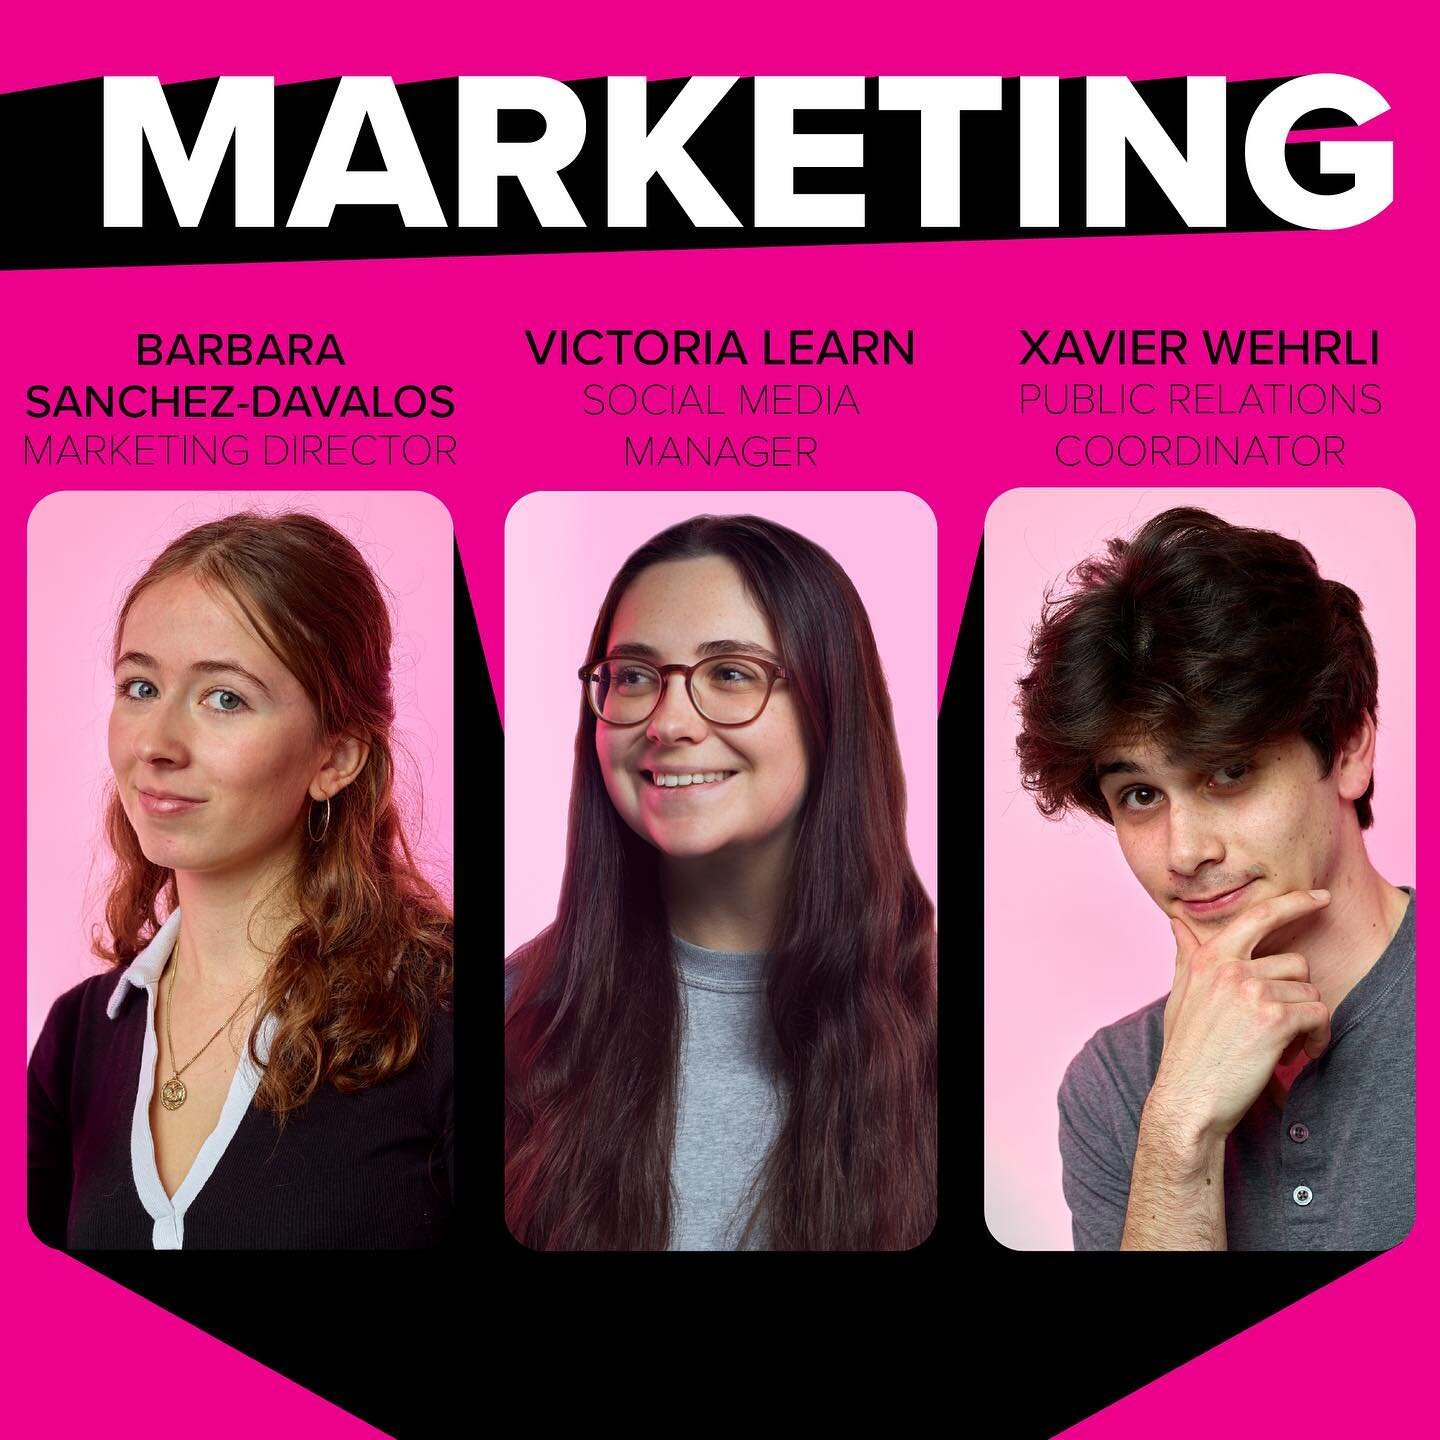 Day 6 Already? MARKETING 🔊🔊

Barbara, our Marketing Director is creating our campaigns and marketing strategies, from print, to online, to merchandise. She&rsquo;s making sure we are consistent across all platforms!
Our Social Media Manager, Victor